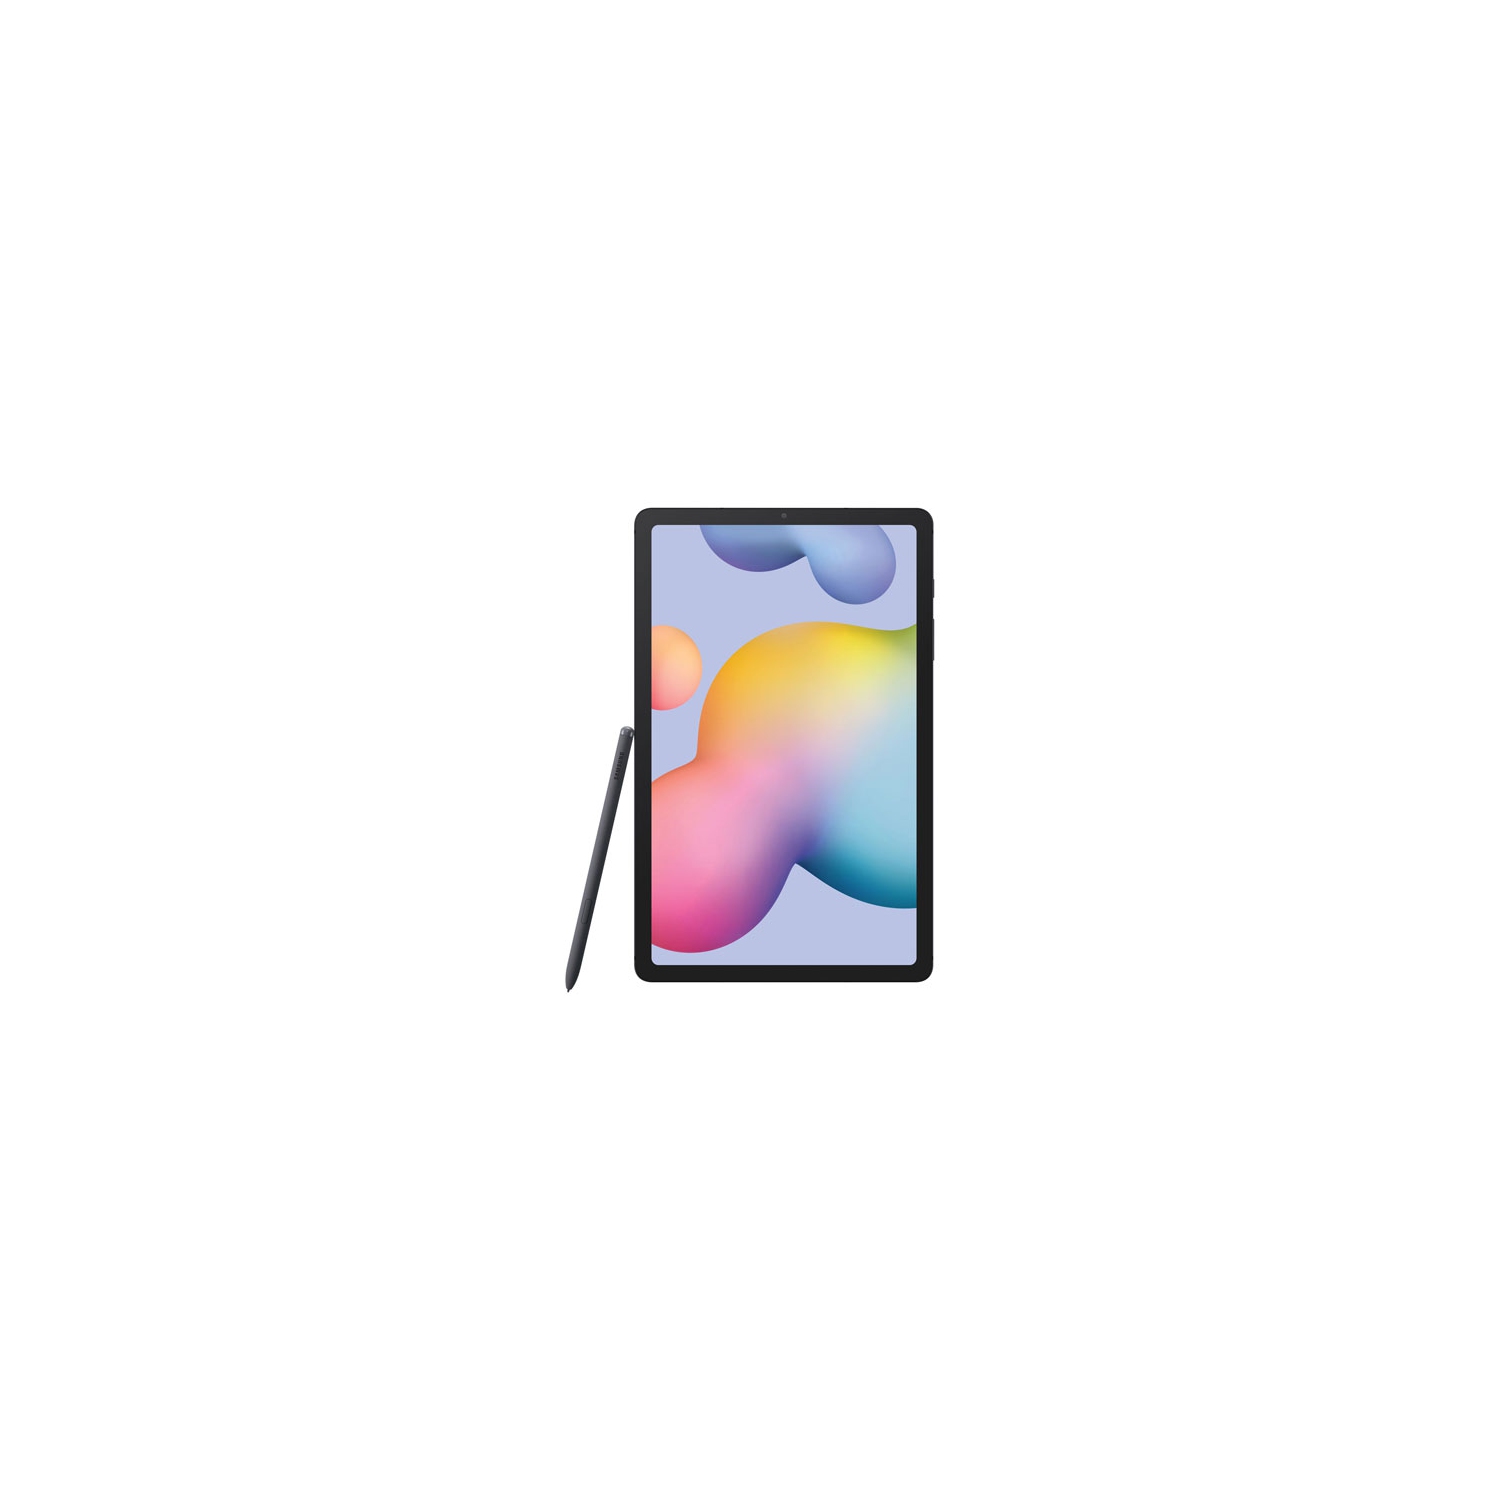 Refurbished (Good) - Samsung Galaxy Tab S6 Lite 10.4" 128GB Android Tablet with Exynos 9611 8-Core Processor - Oxford Grey